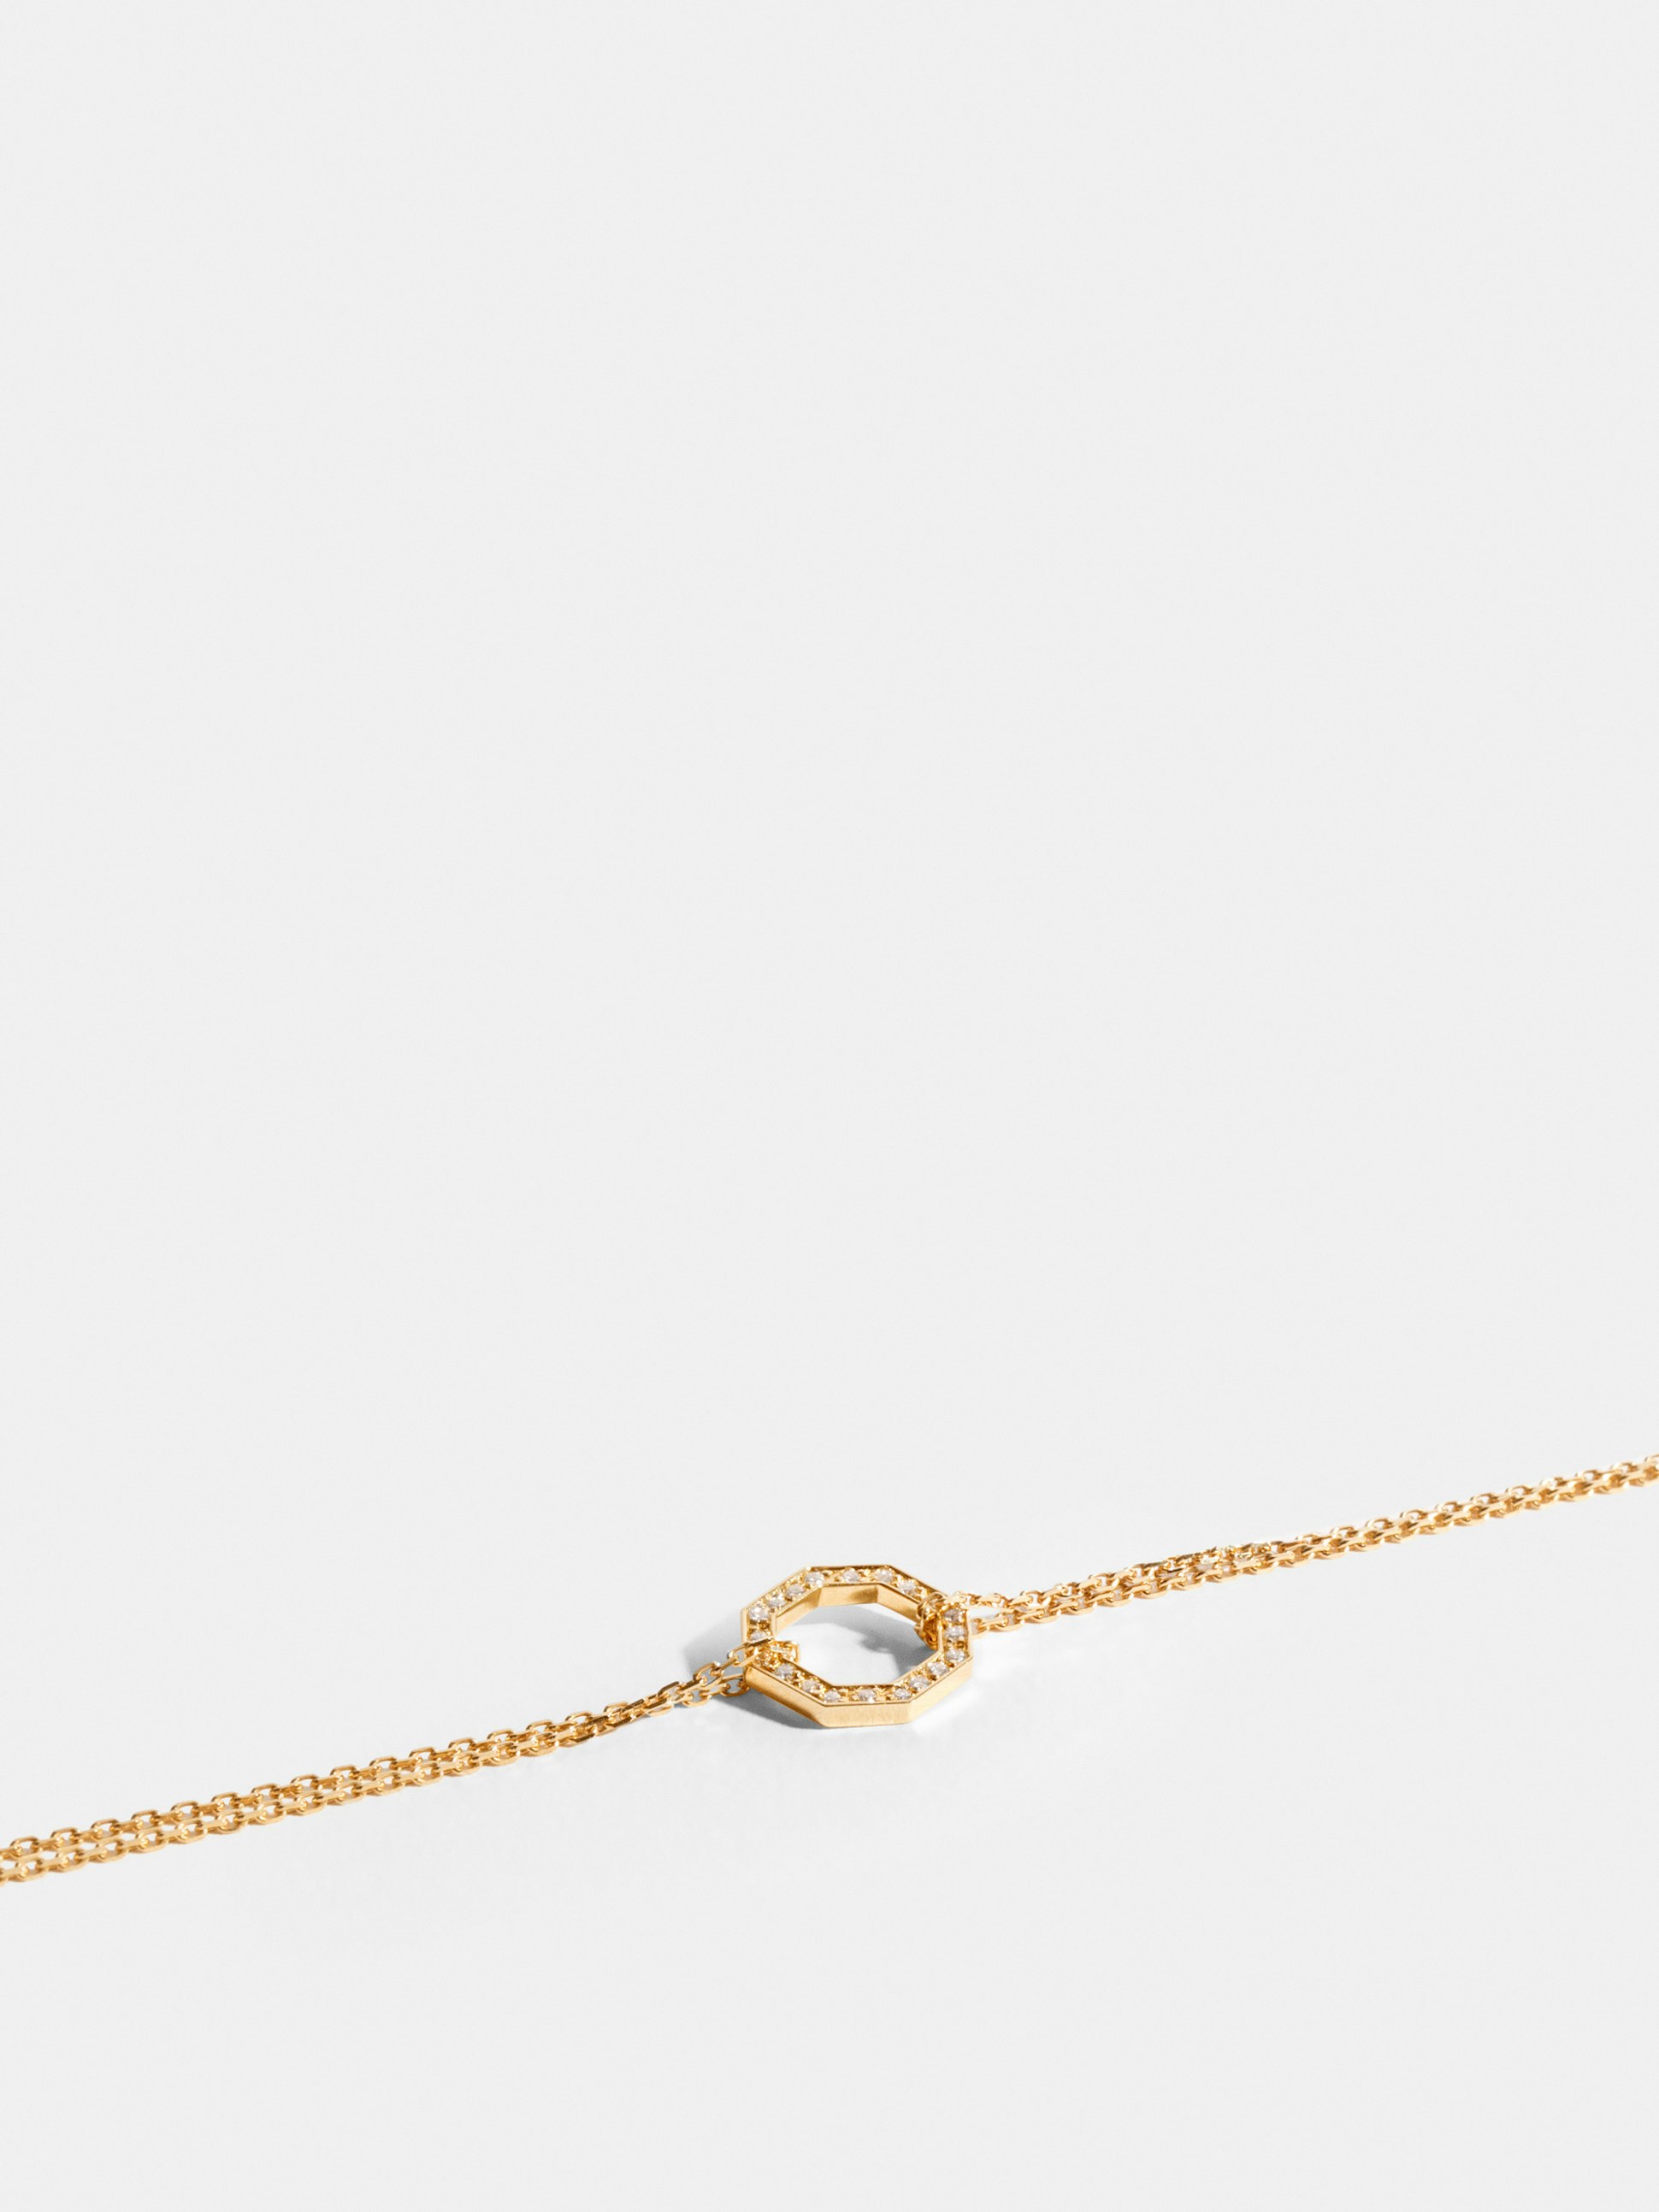 Octogone motif in 18k Fairmined ethical yellow gold, paved with lab-grown diamonds, on a chain.